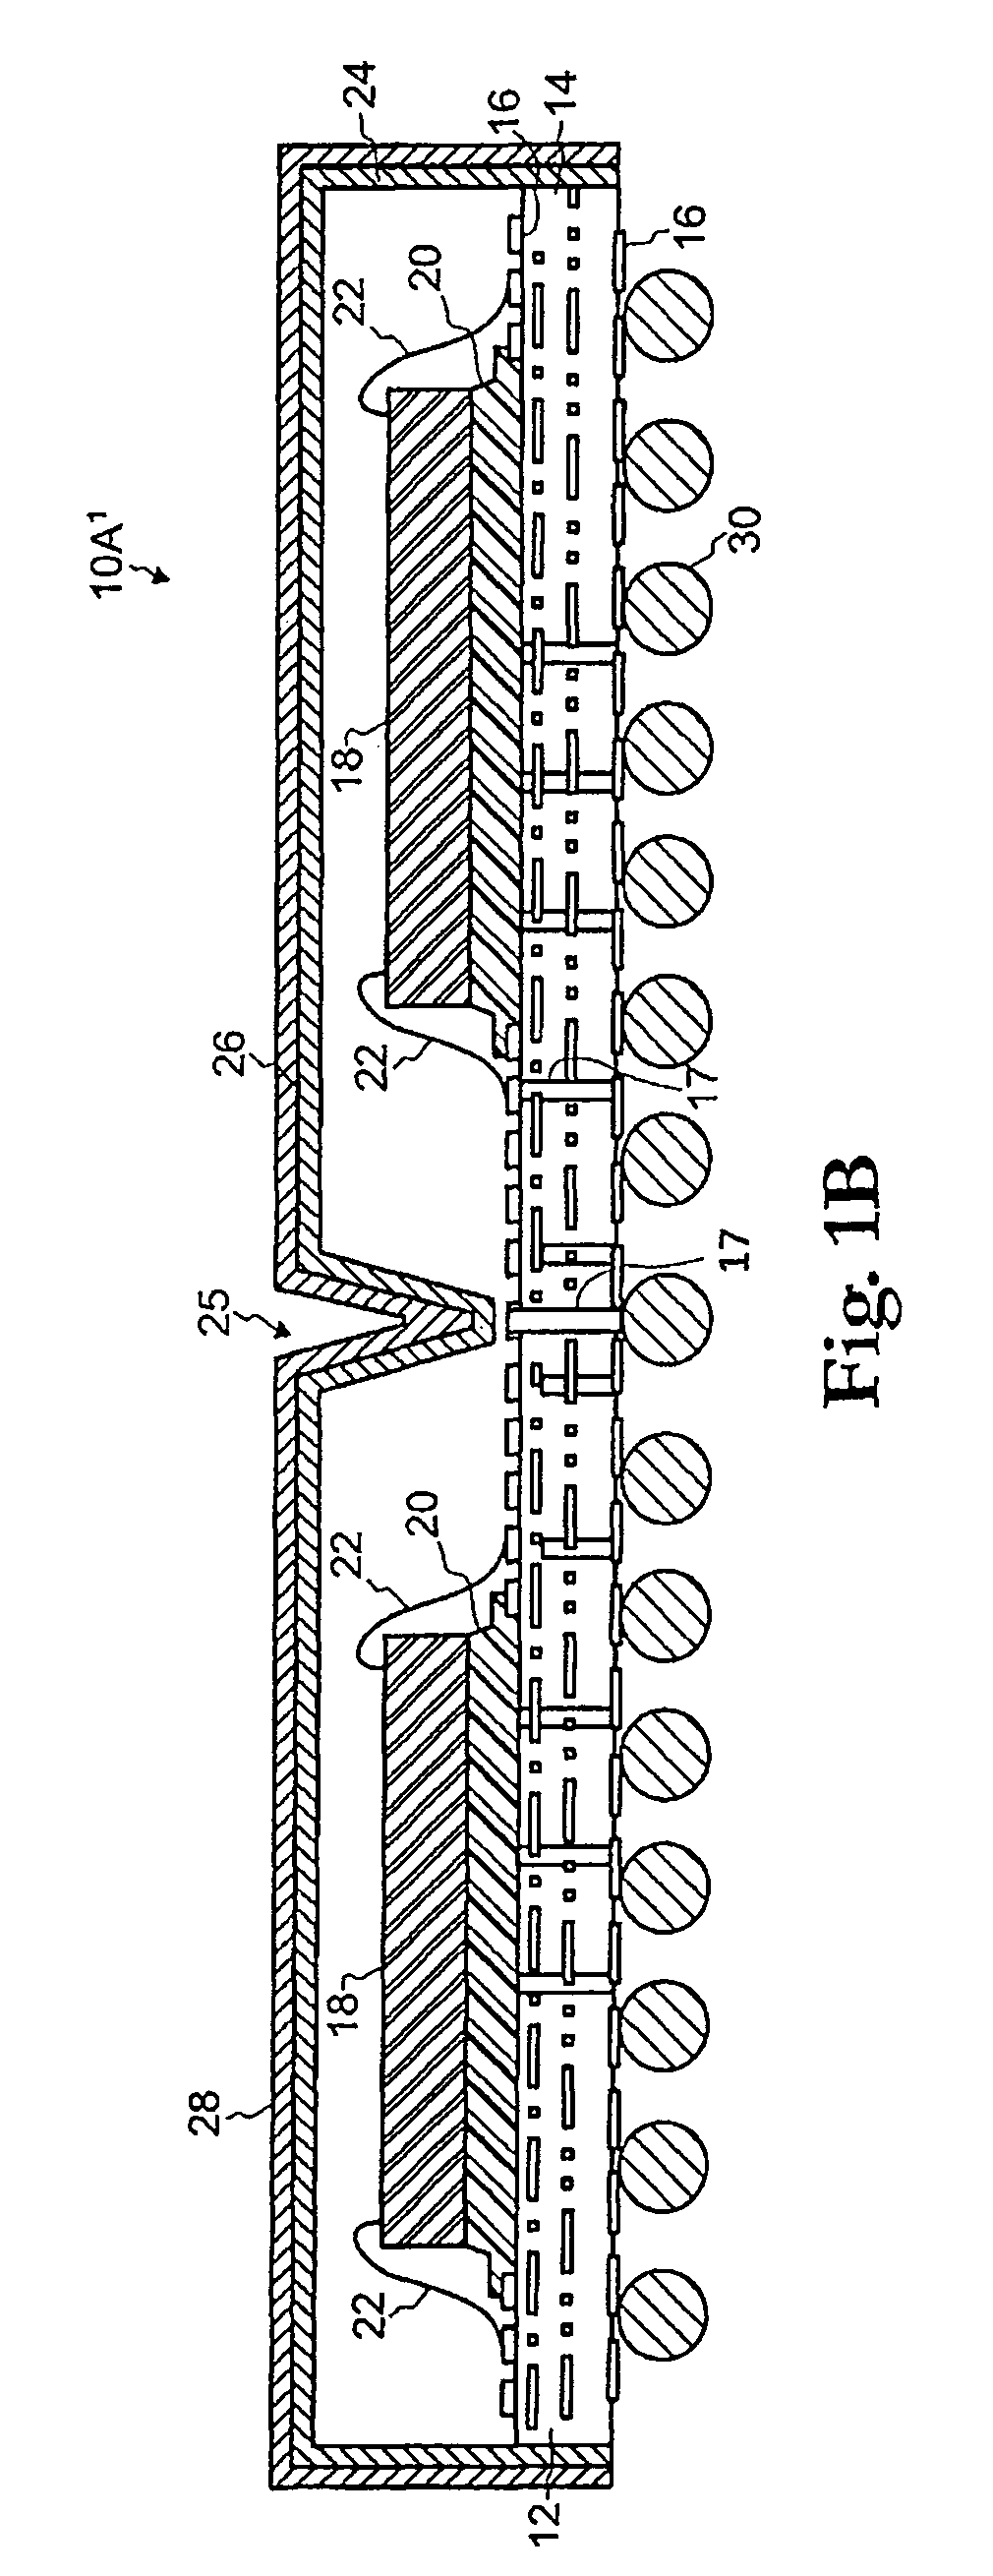 System and method for RF shielding of a semiconductor package